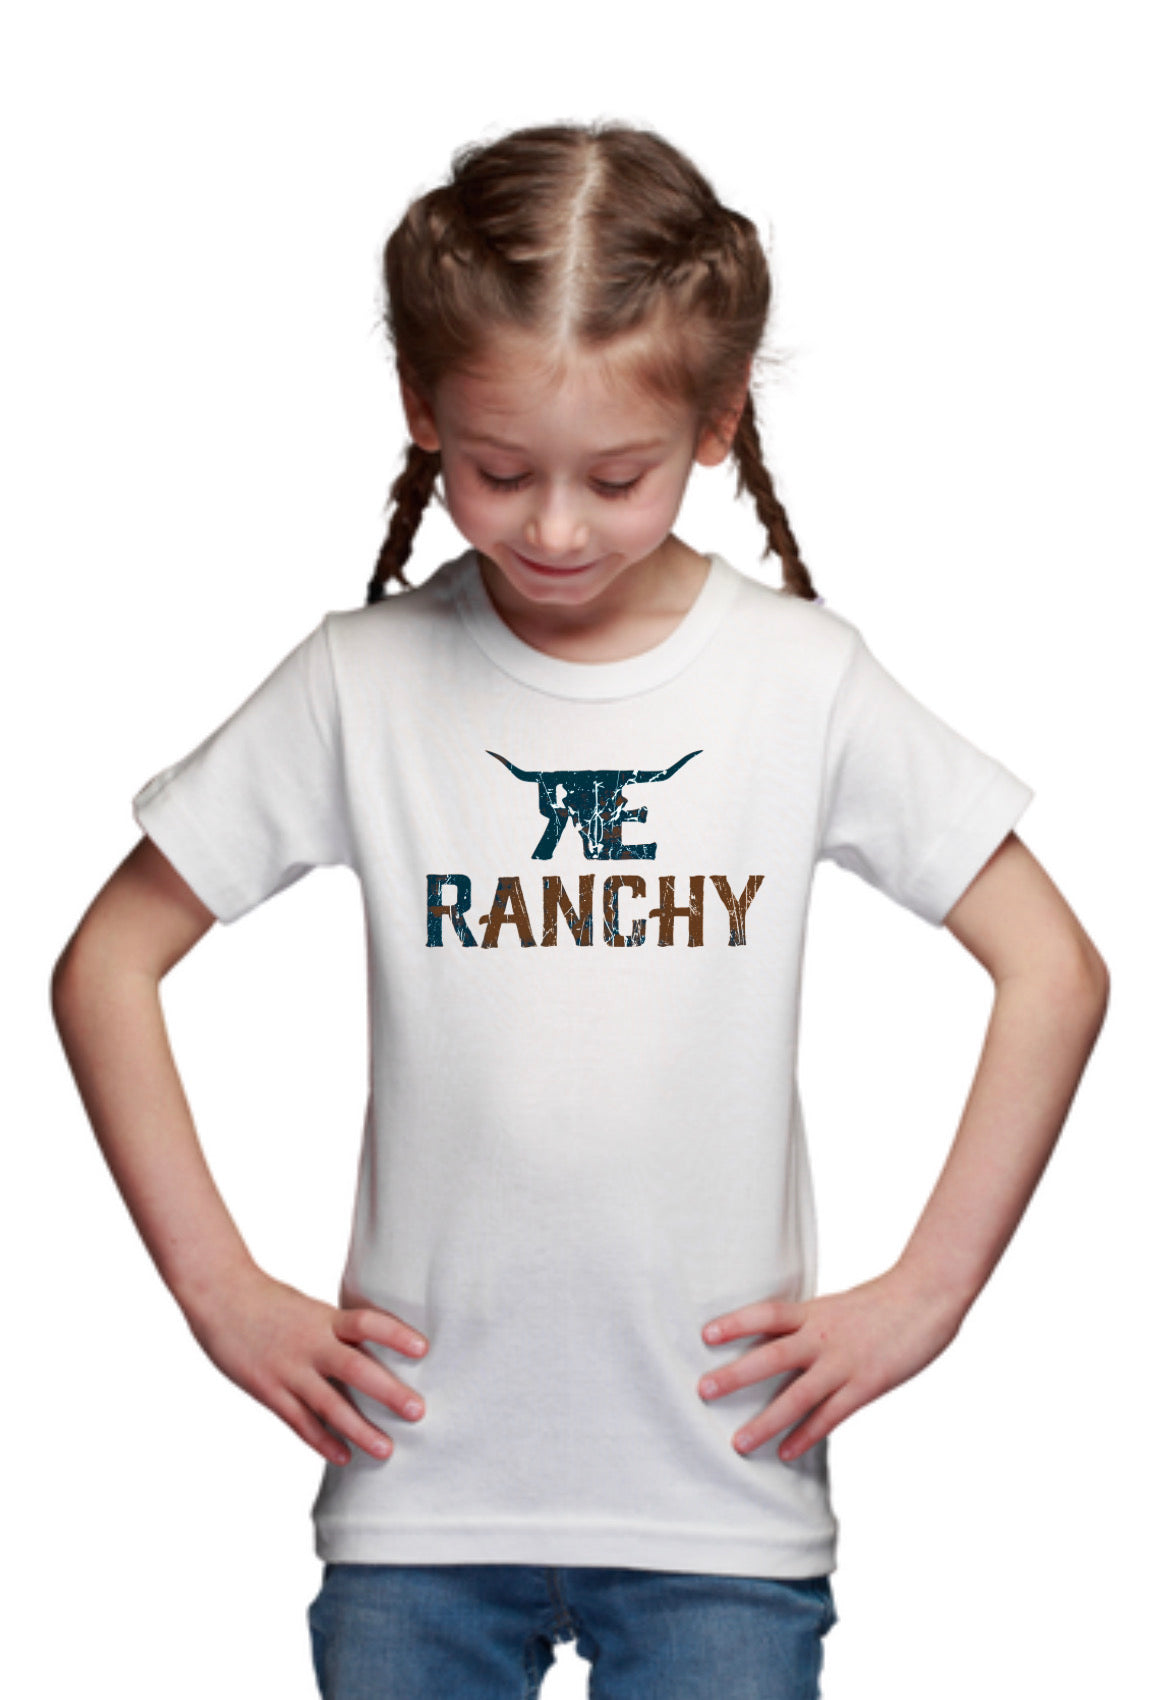 Ruggedly Distressed Tee Shirt (Youth)